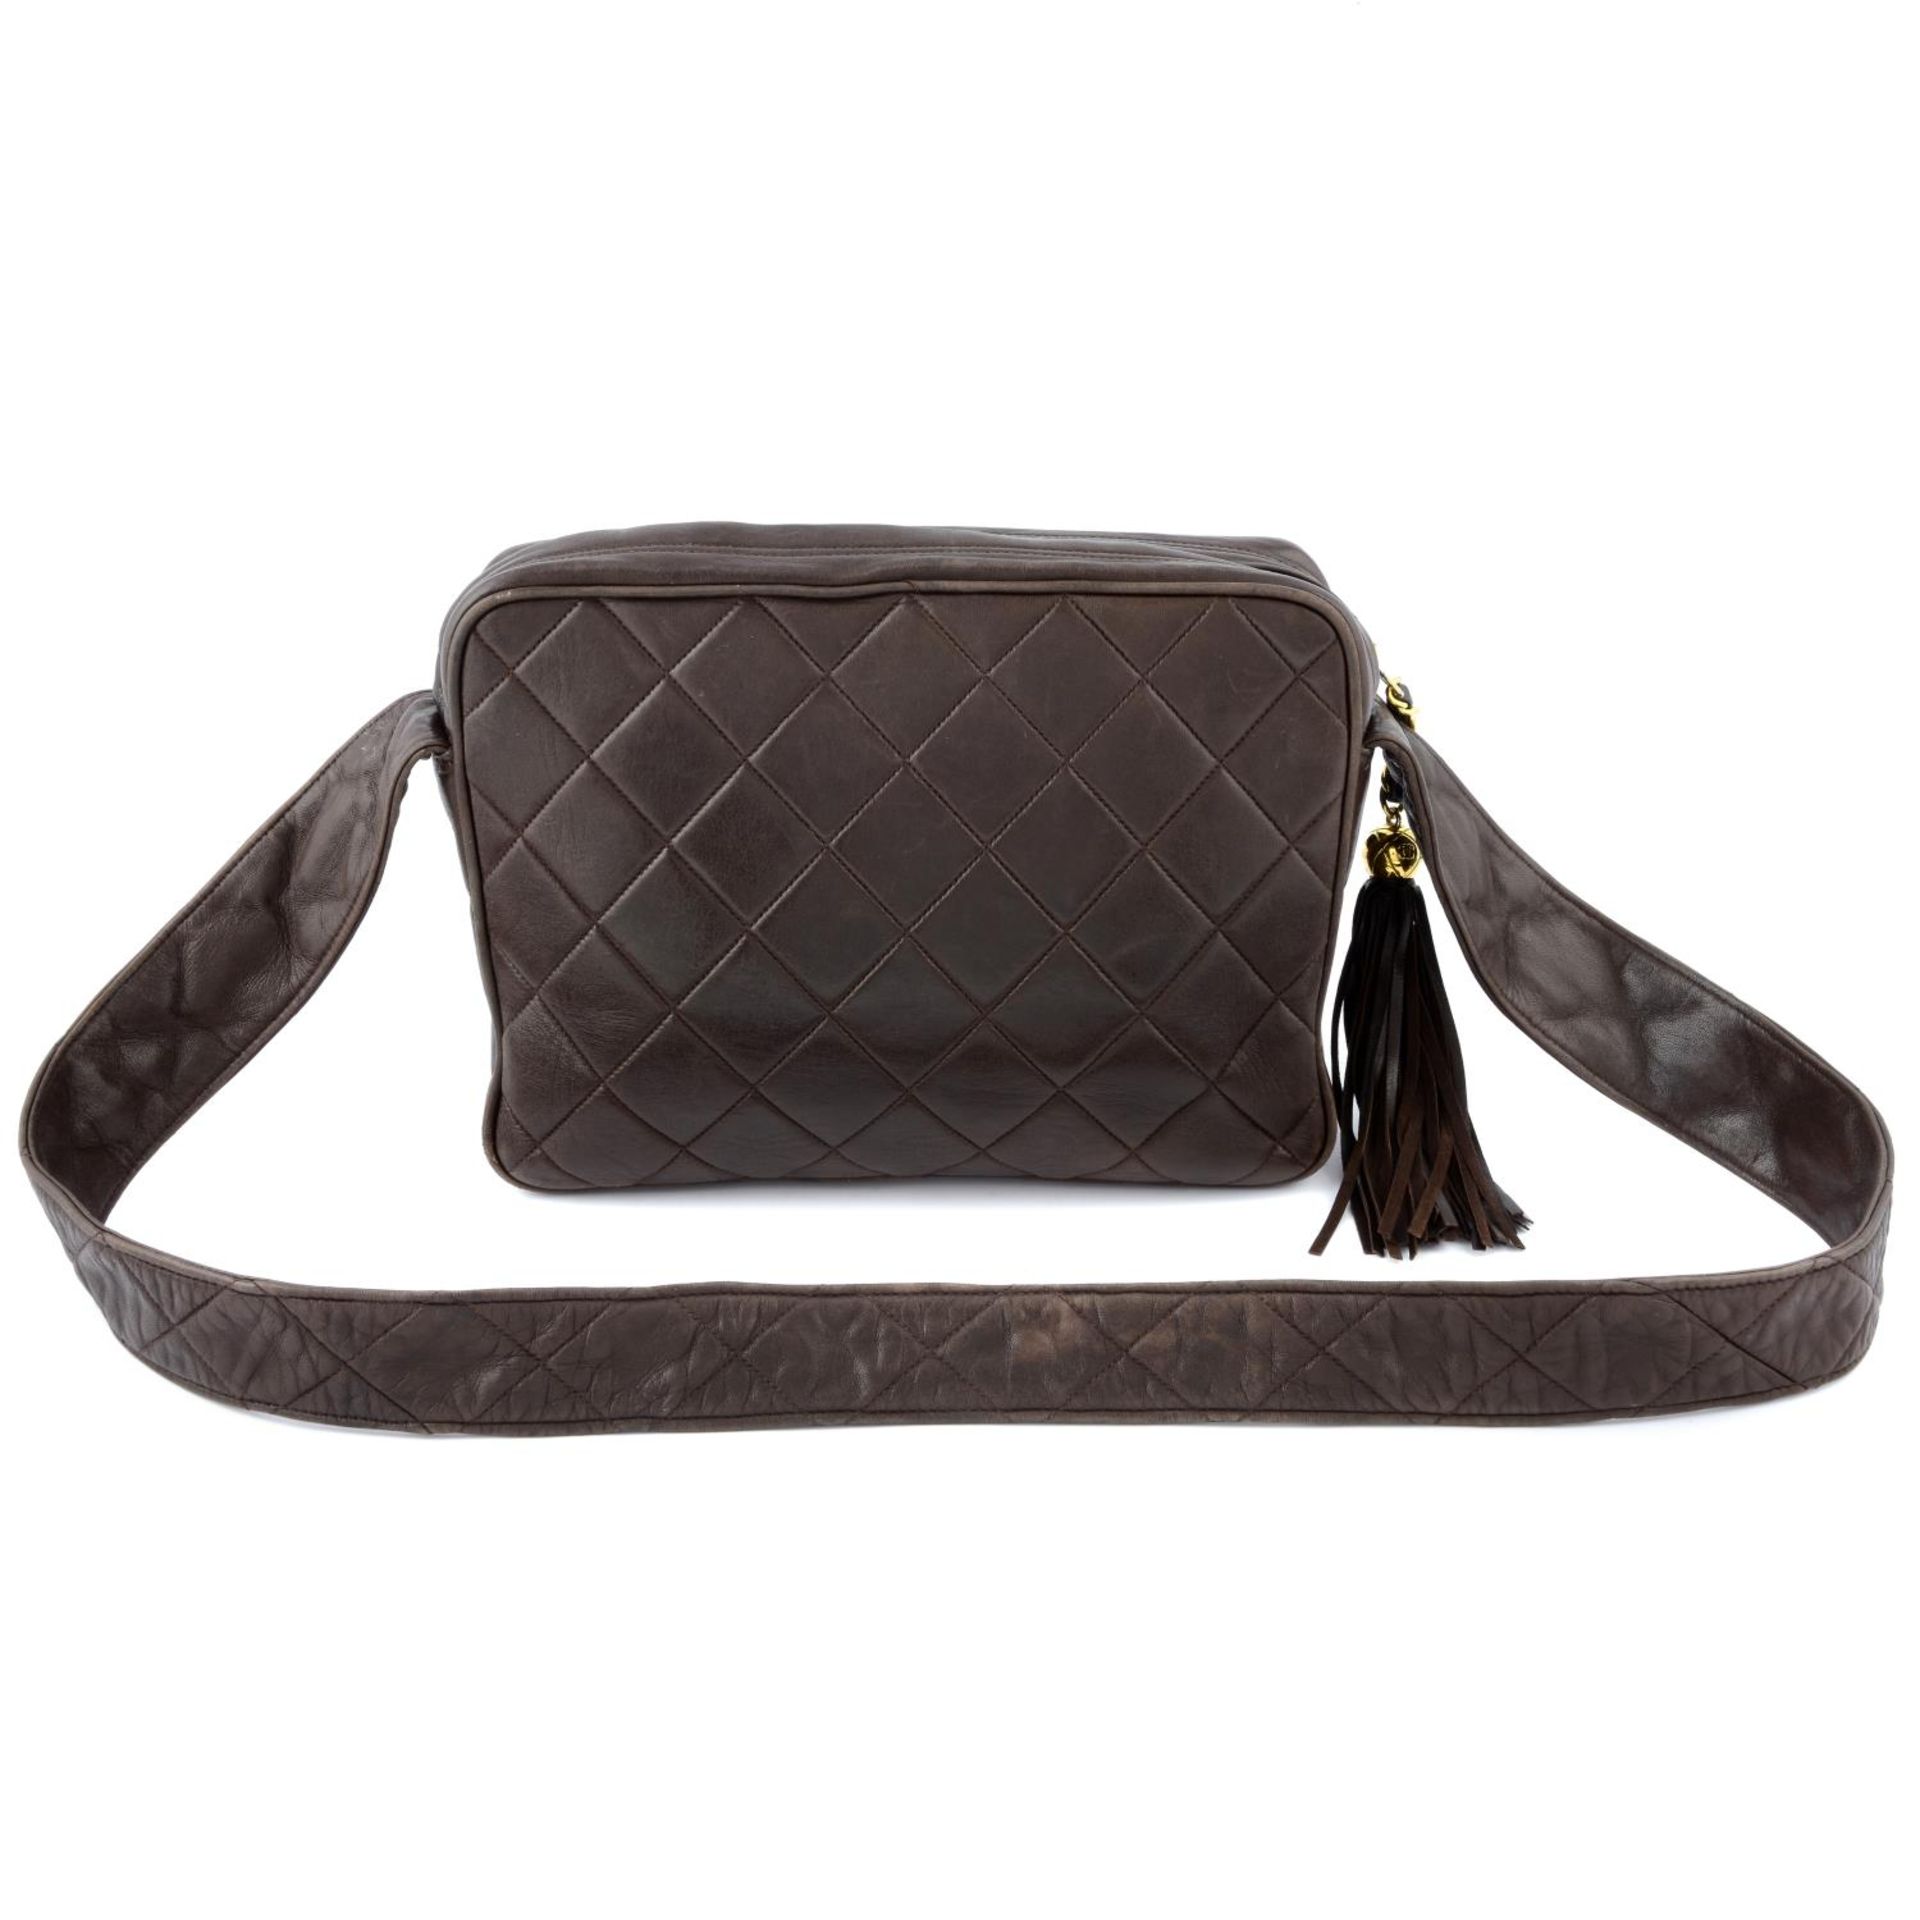 CHANEL - a brown diamond quilted crossbody handbag. - Image 2 of 5